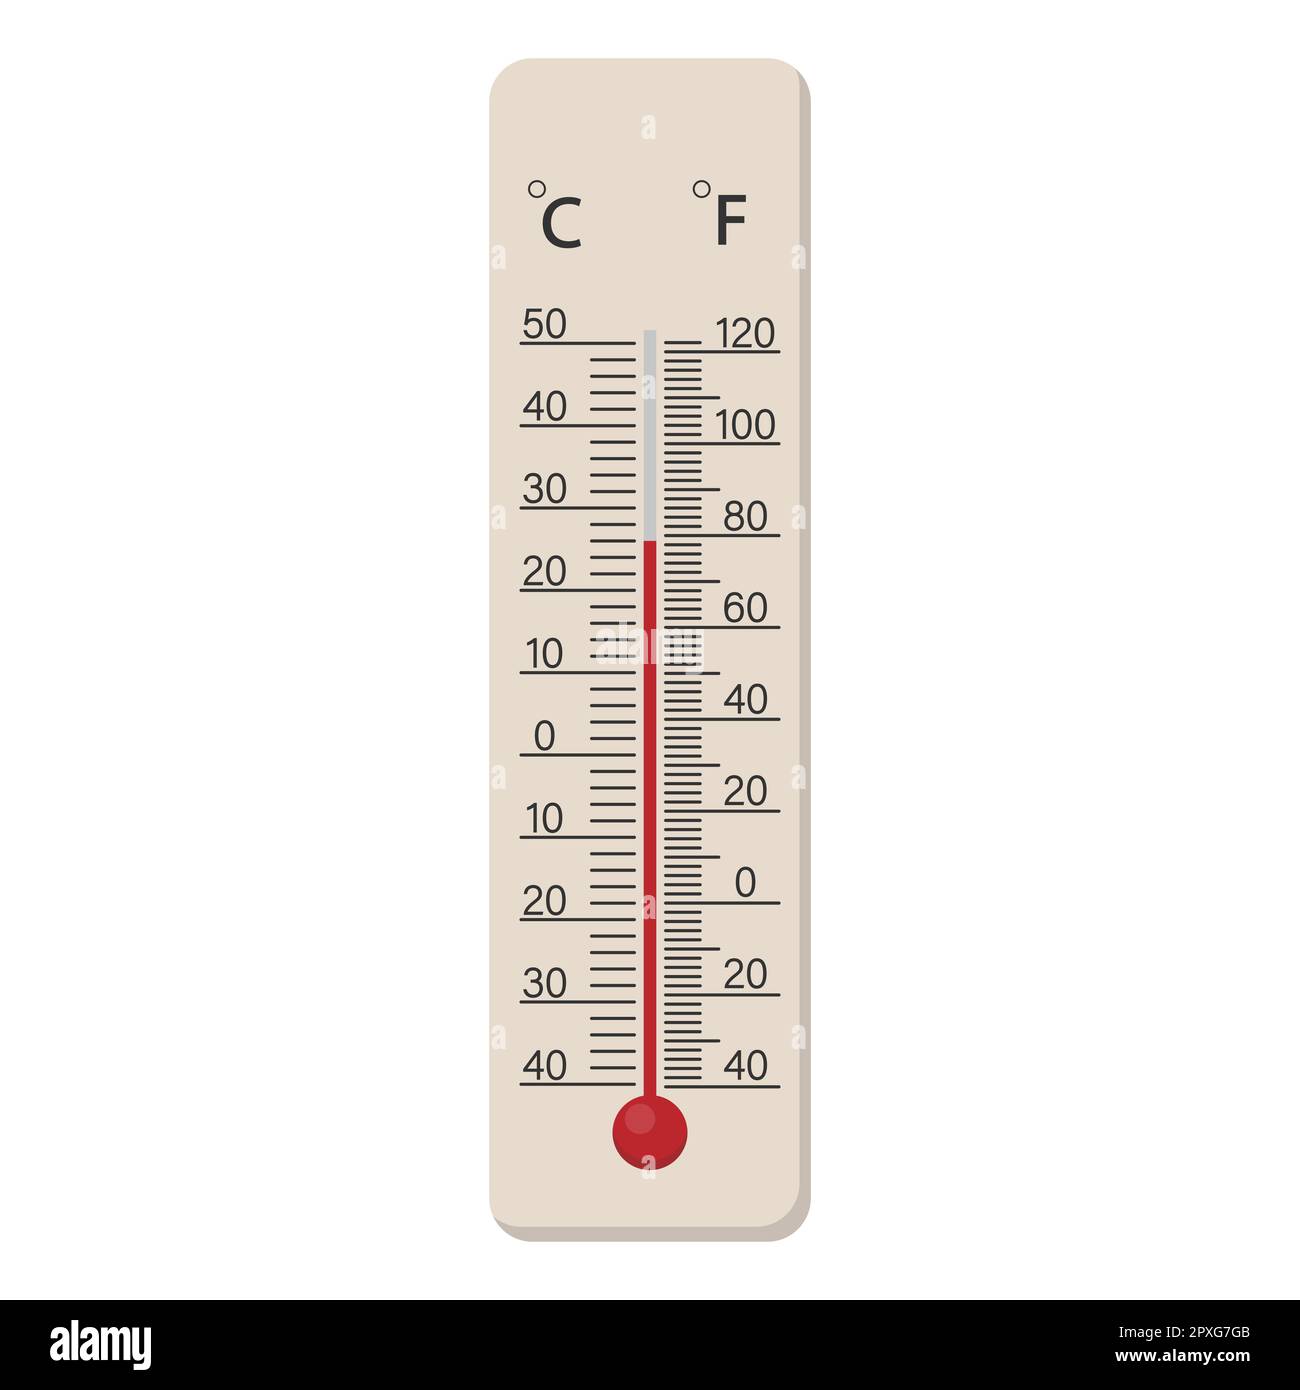 https://c8.alamy.com/comp/2PXG7GB/meteorological-thermometer-fahrenheit-and-celsius-for-measuring-air-temperature-vector-illustration-eps-10-2PXG7GB.jpg